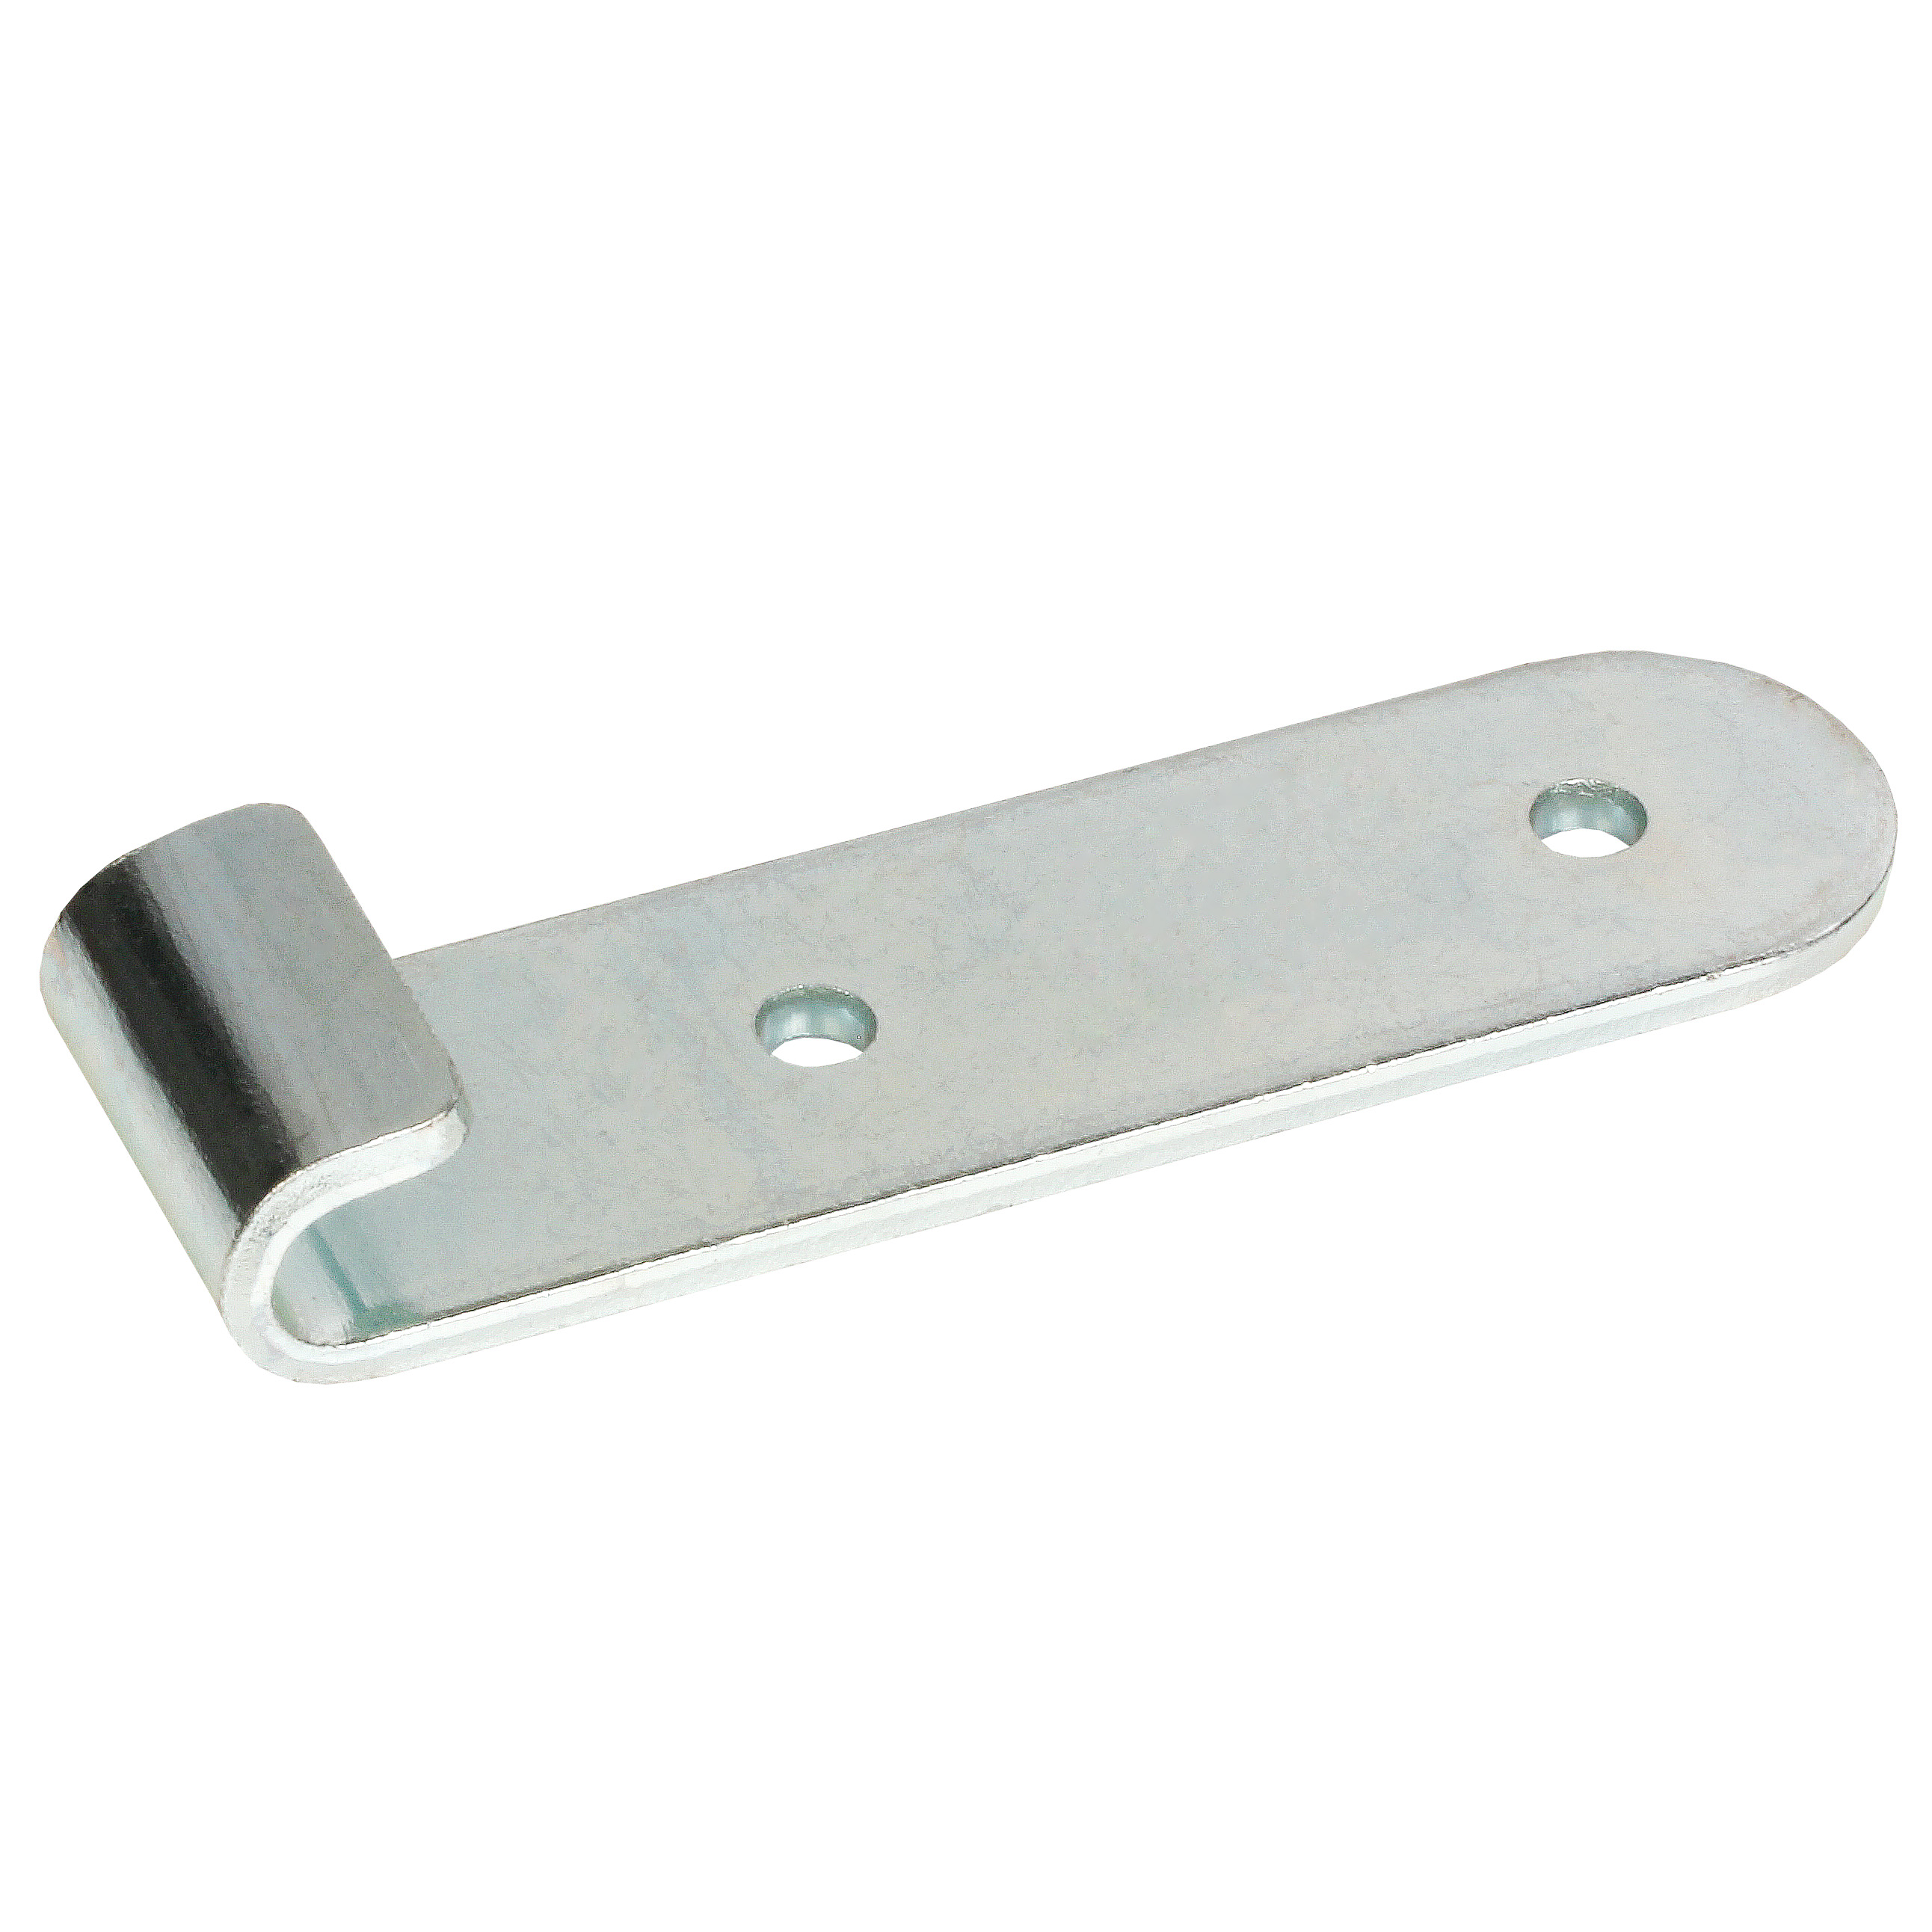 Strike for toggle latch - 25.5mm - Steel - Flat